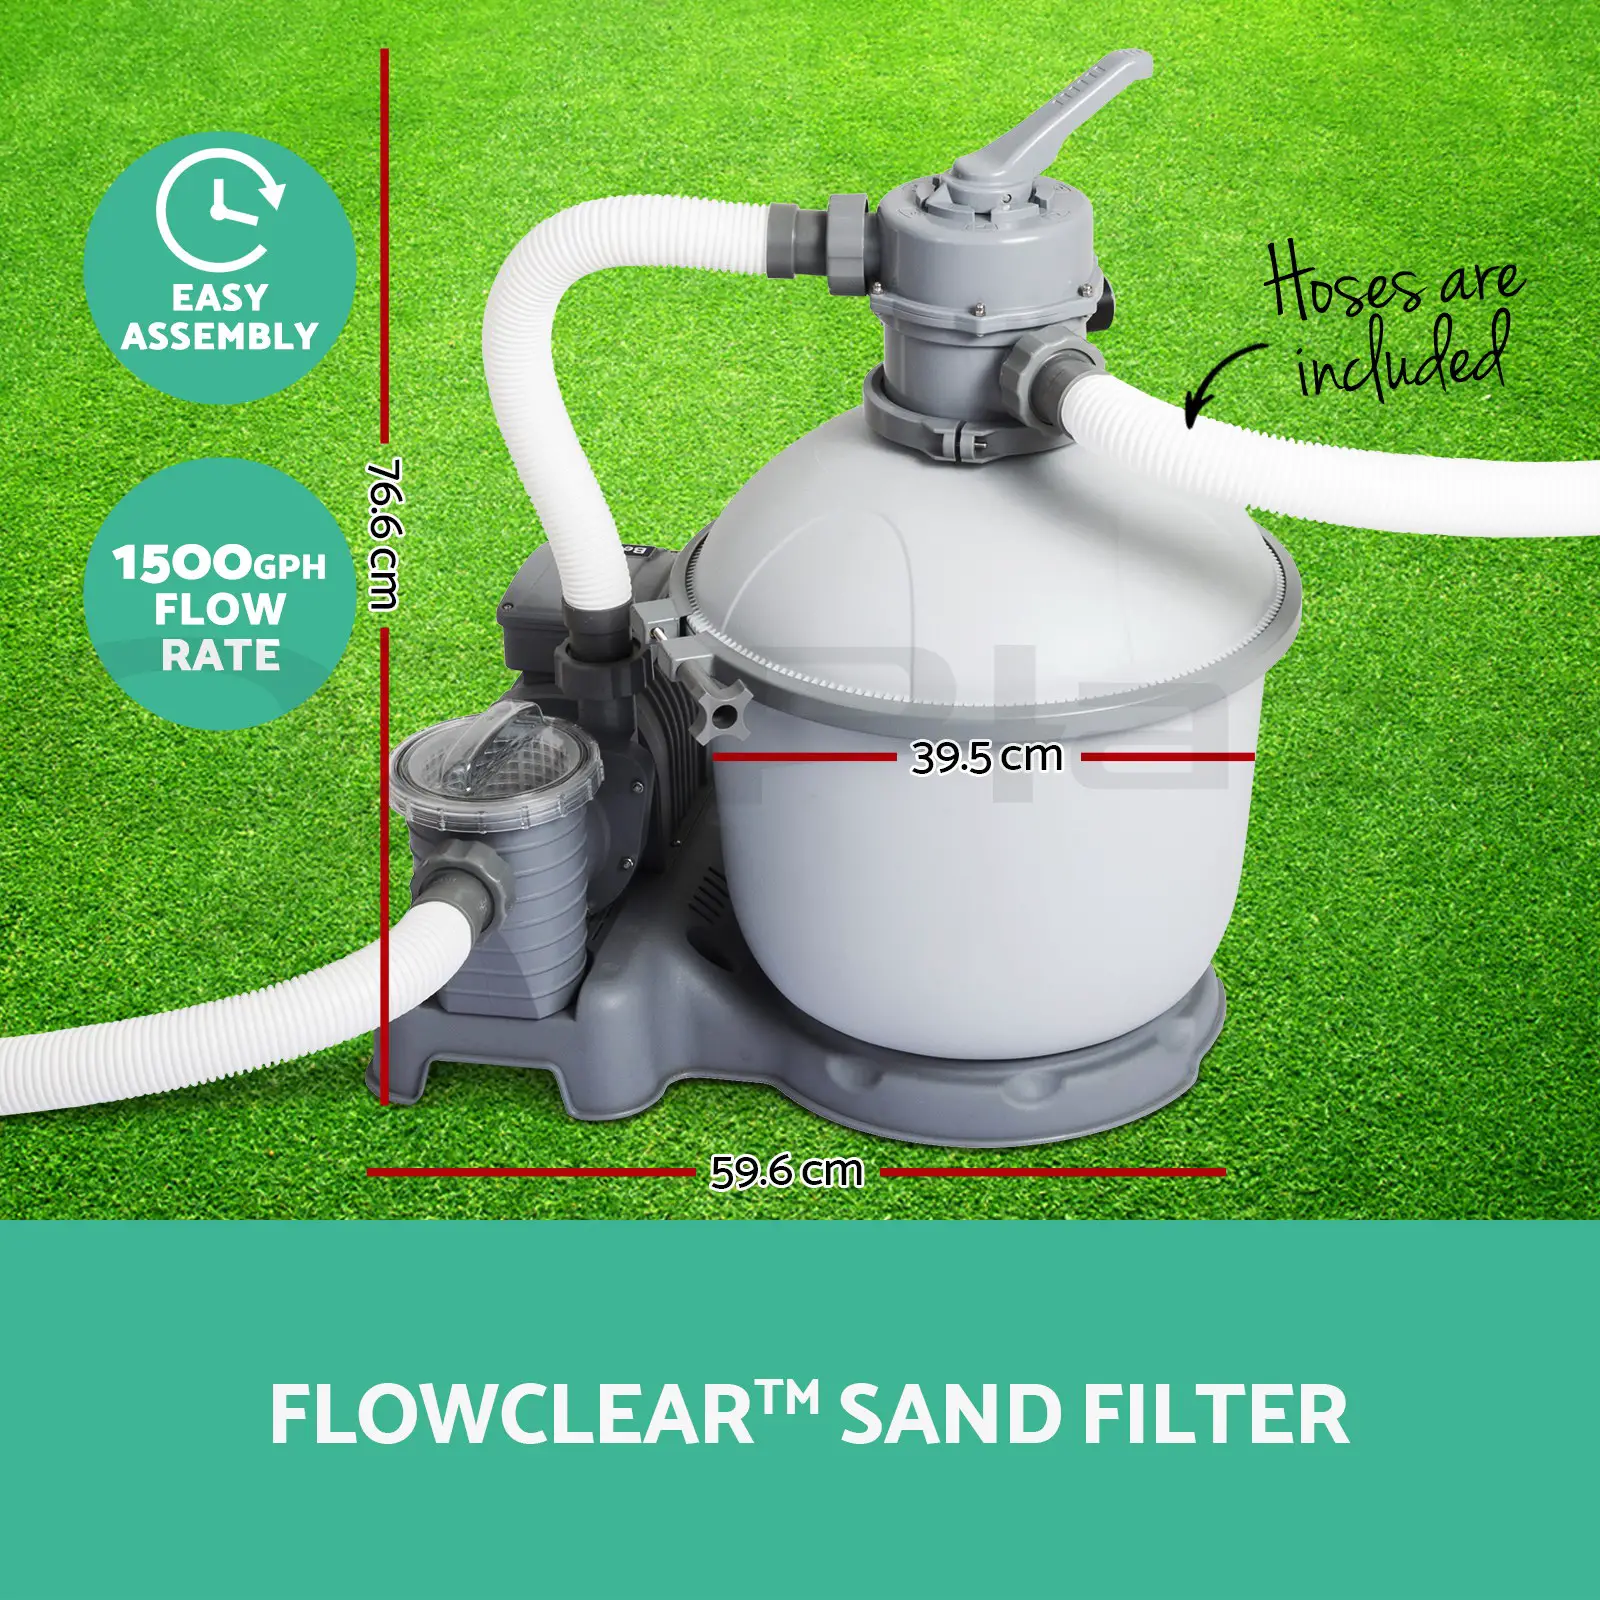 Bestway 1500GPH Flowclear Sand Filter Swimming Above Ground Pool ...